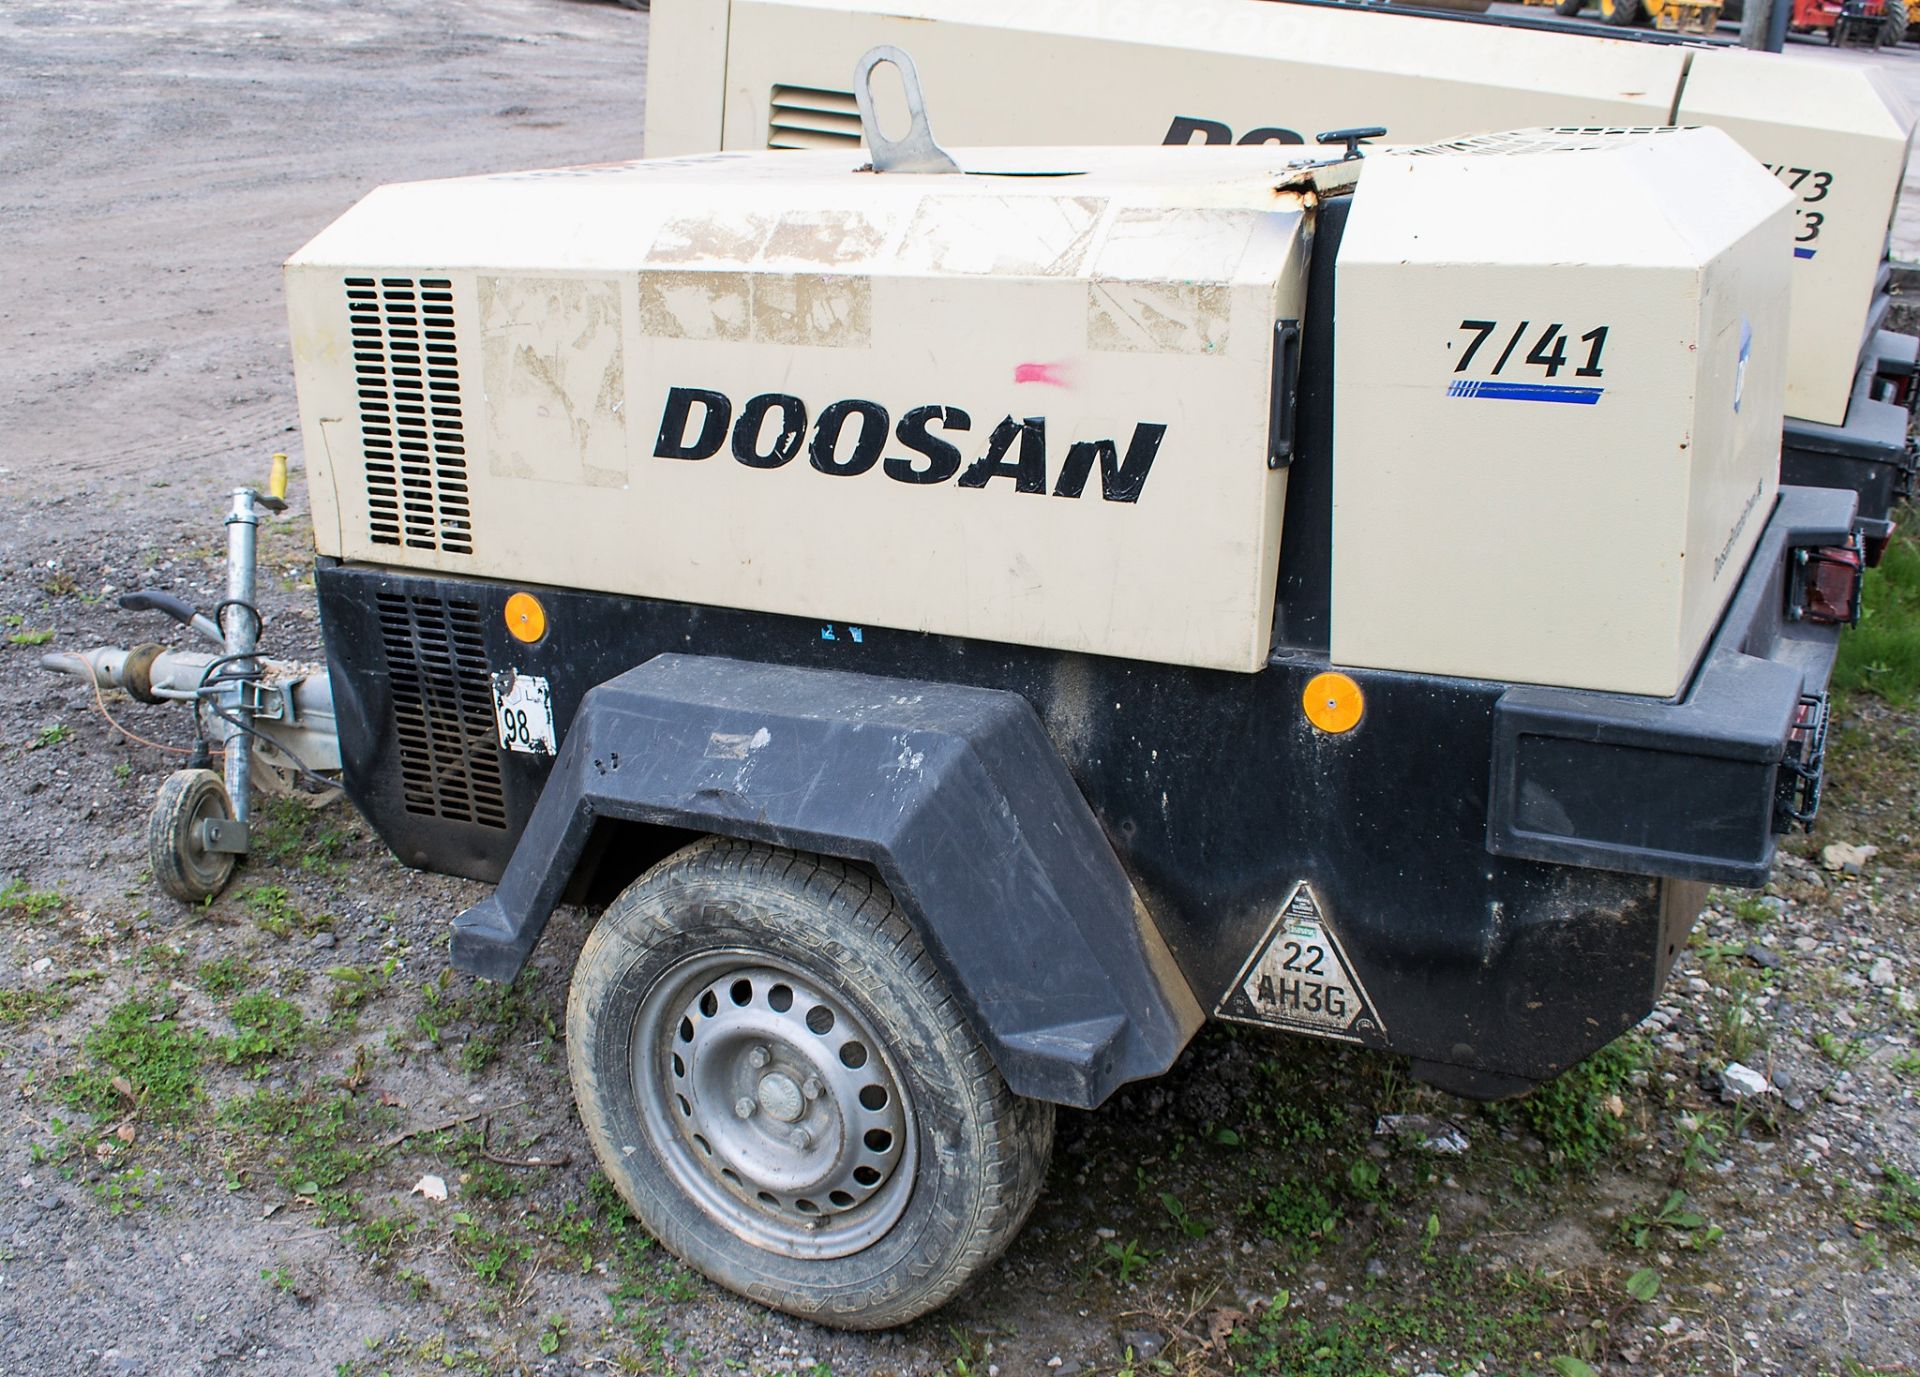 Doosan 7/41 diesel driven mobile air compressor Year: 2013 S/N: 432289 Recorded Hours: 426 A602696 - Image 2 of 3